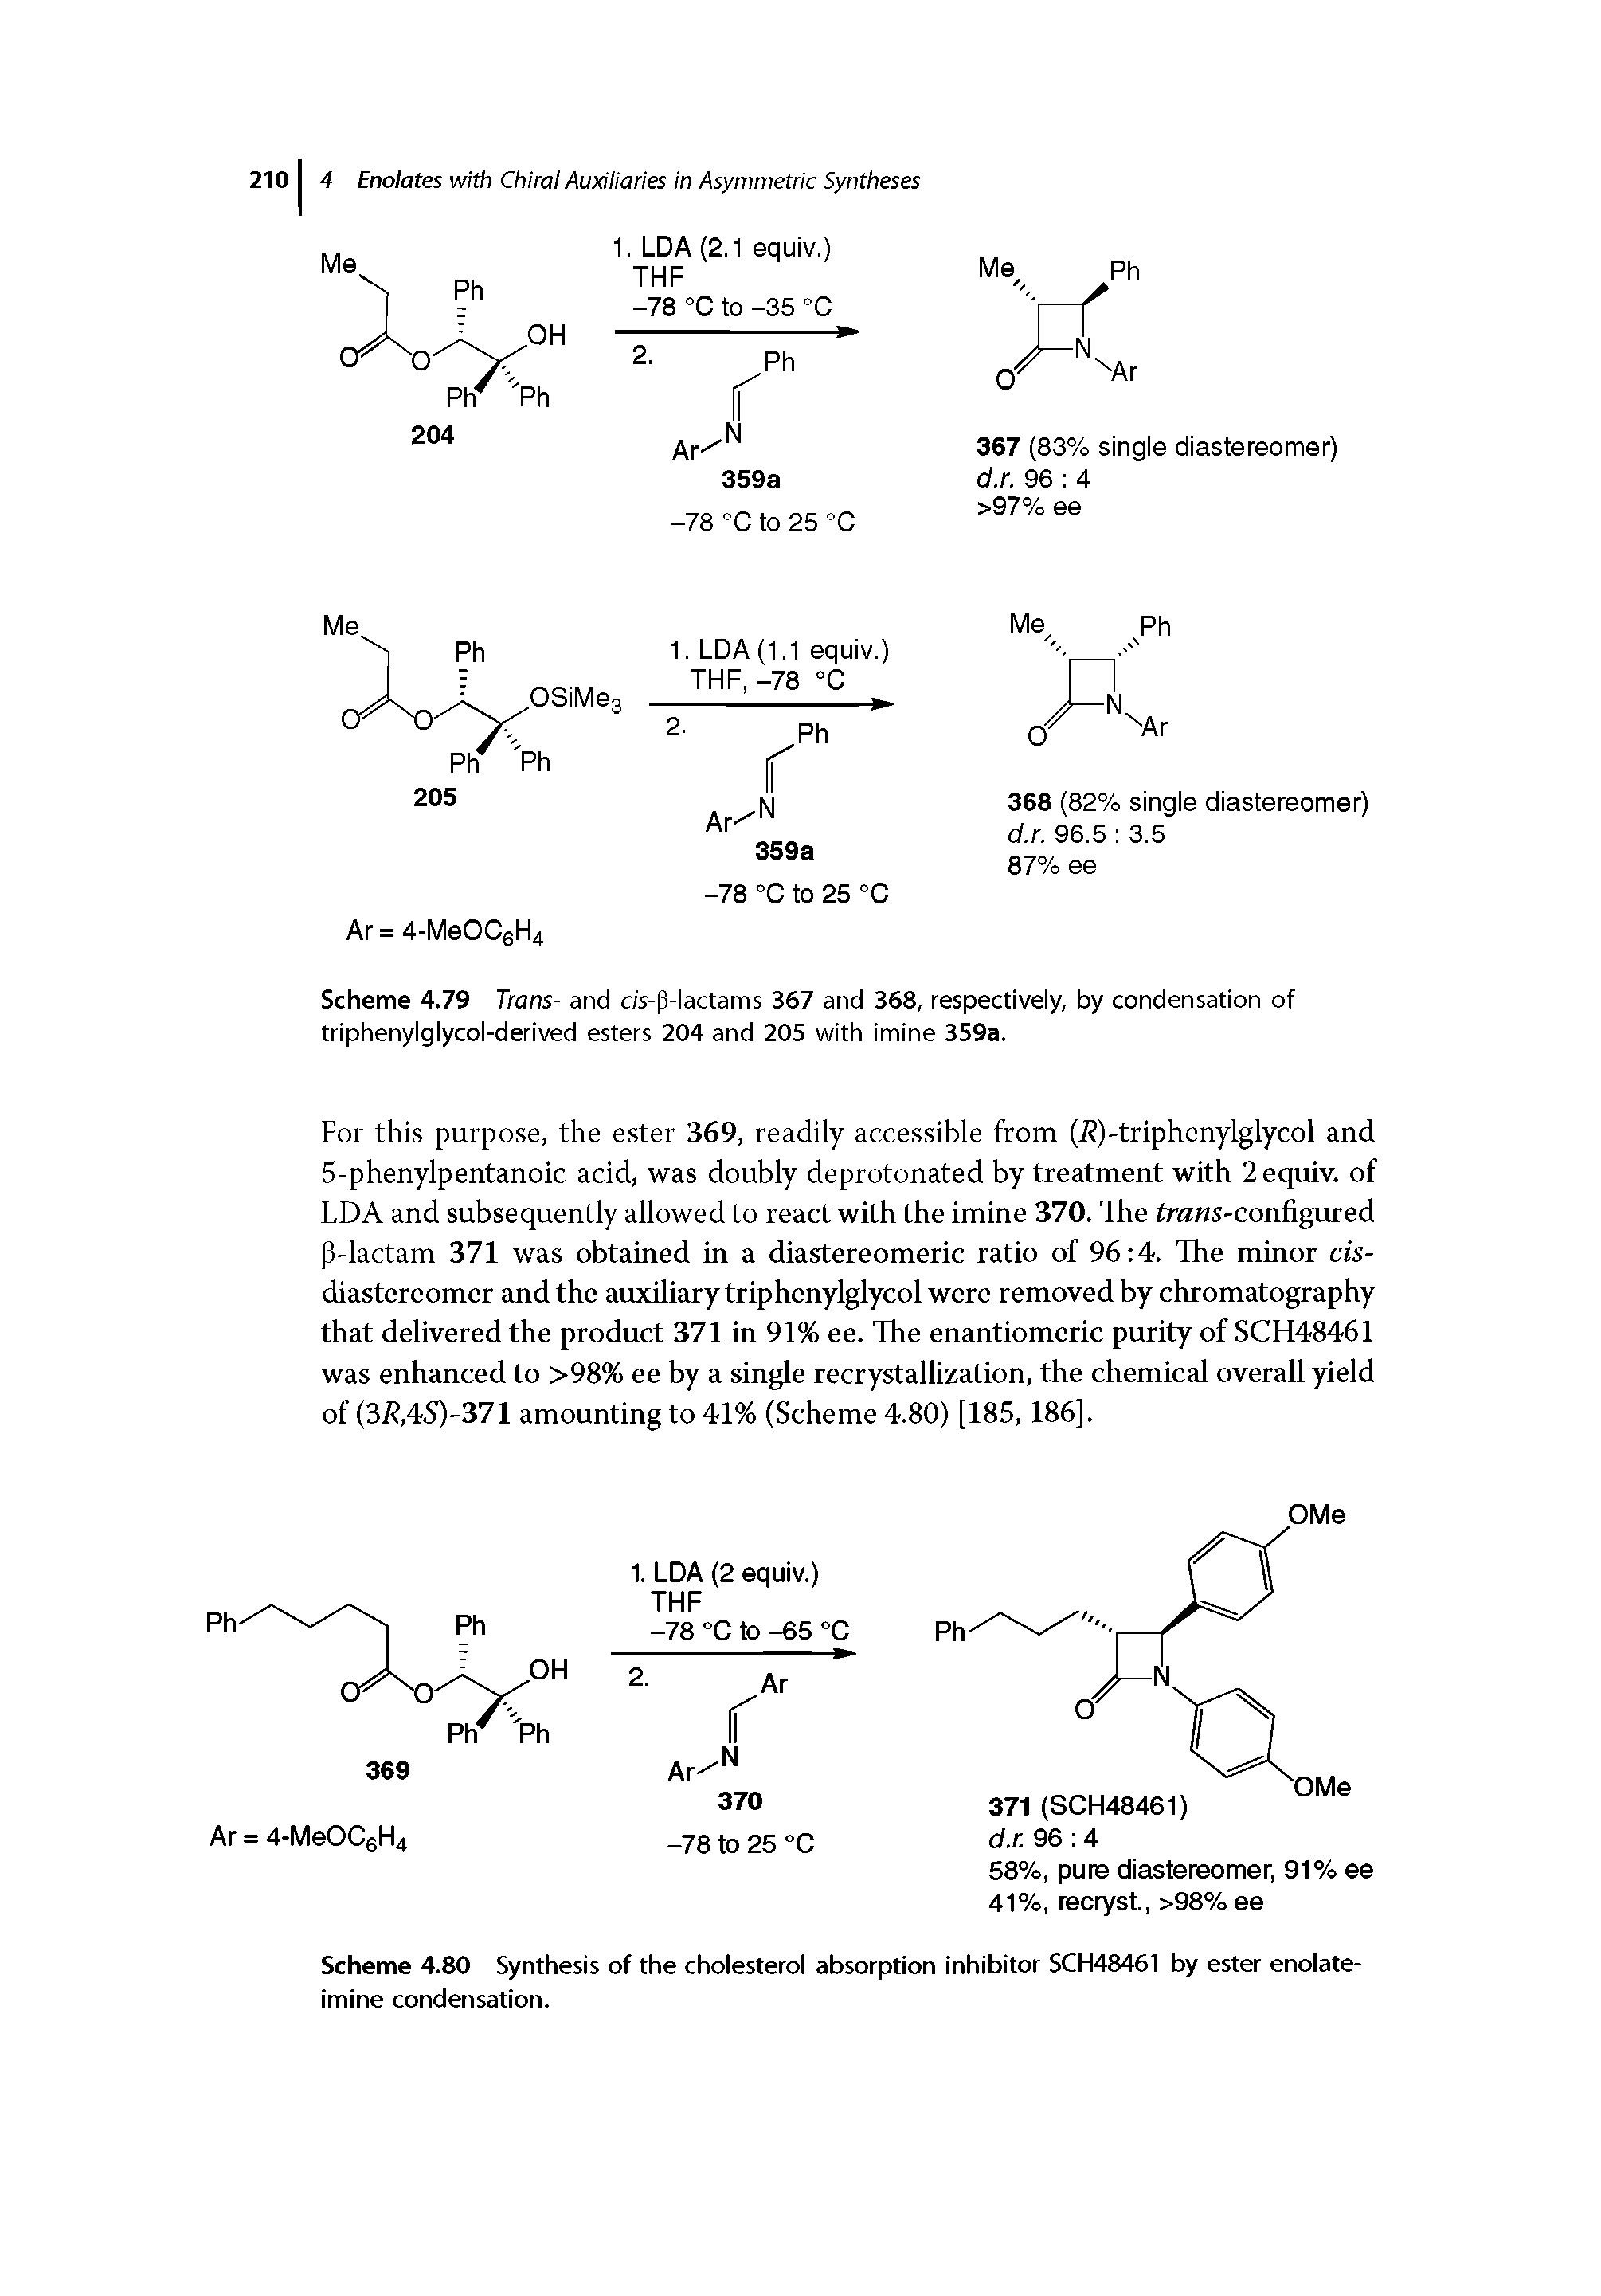 Scheme 4.80 Synthesis of the cholesterol absorption inhibitor SCH48461 by ester enolate-imine condensation.